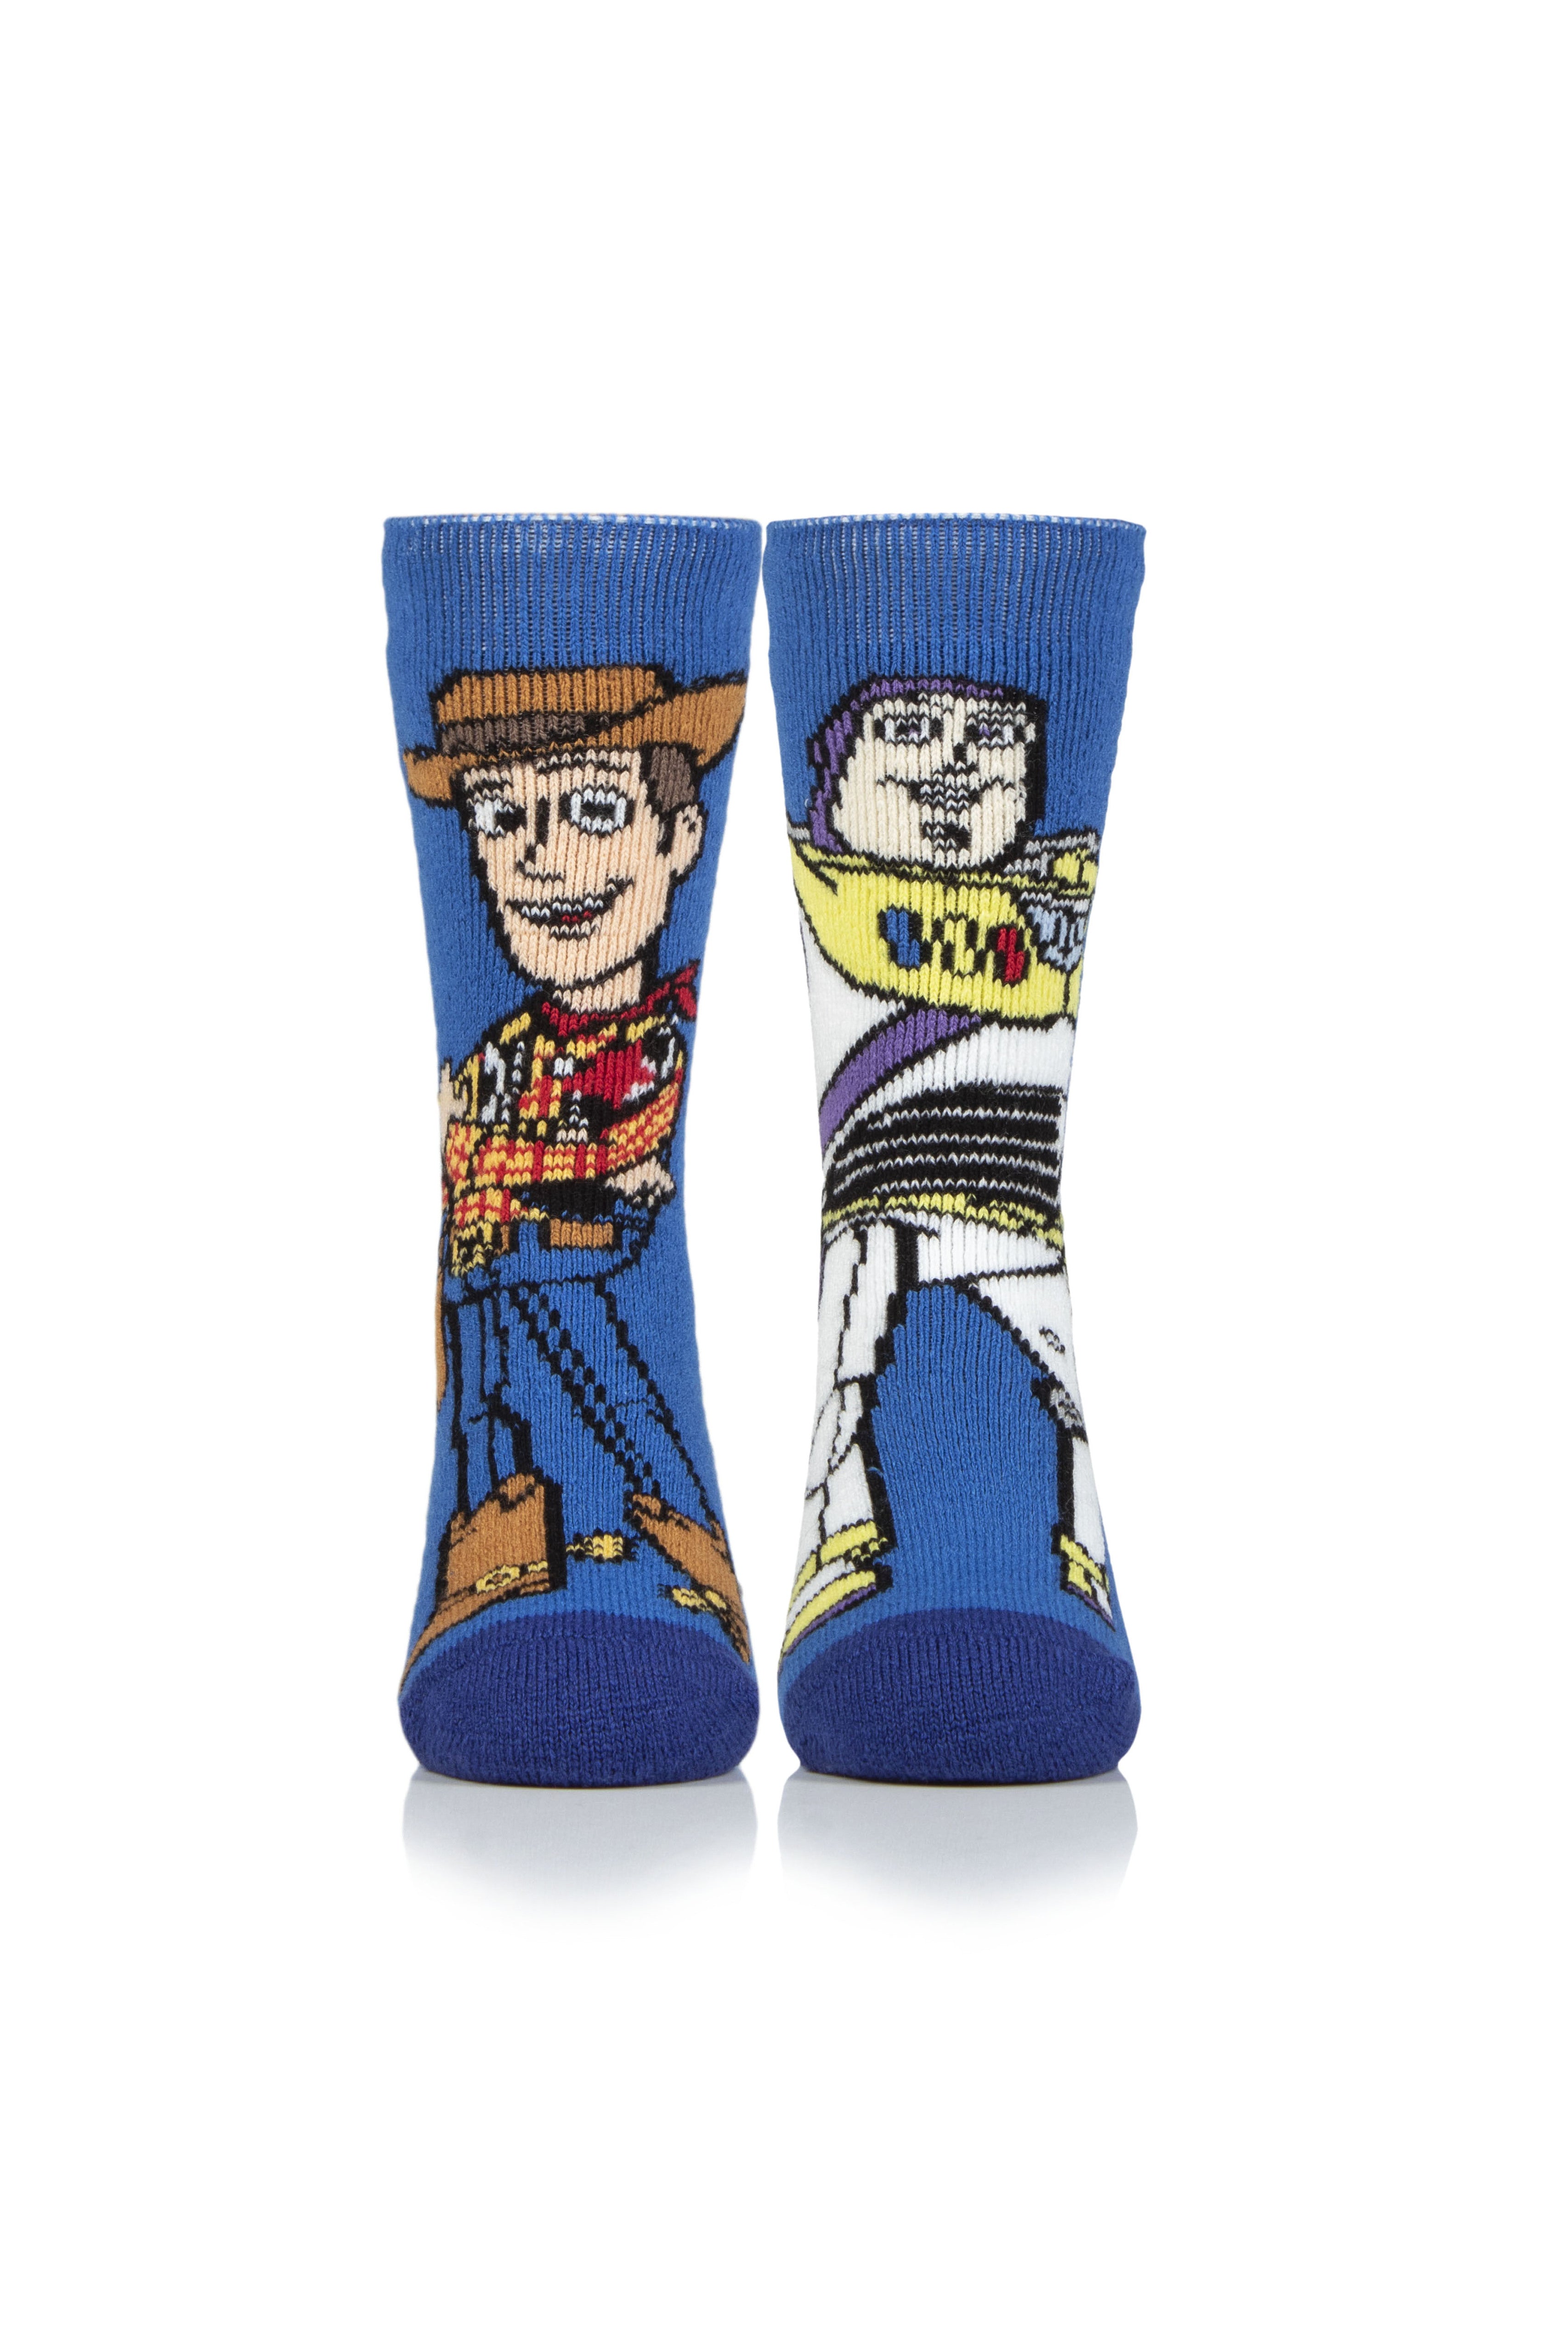 HEAT HOLDERS Lite Licensed Toy Story Character Socks-Woody and Buzz Lightyear-Kids